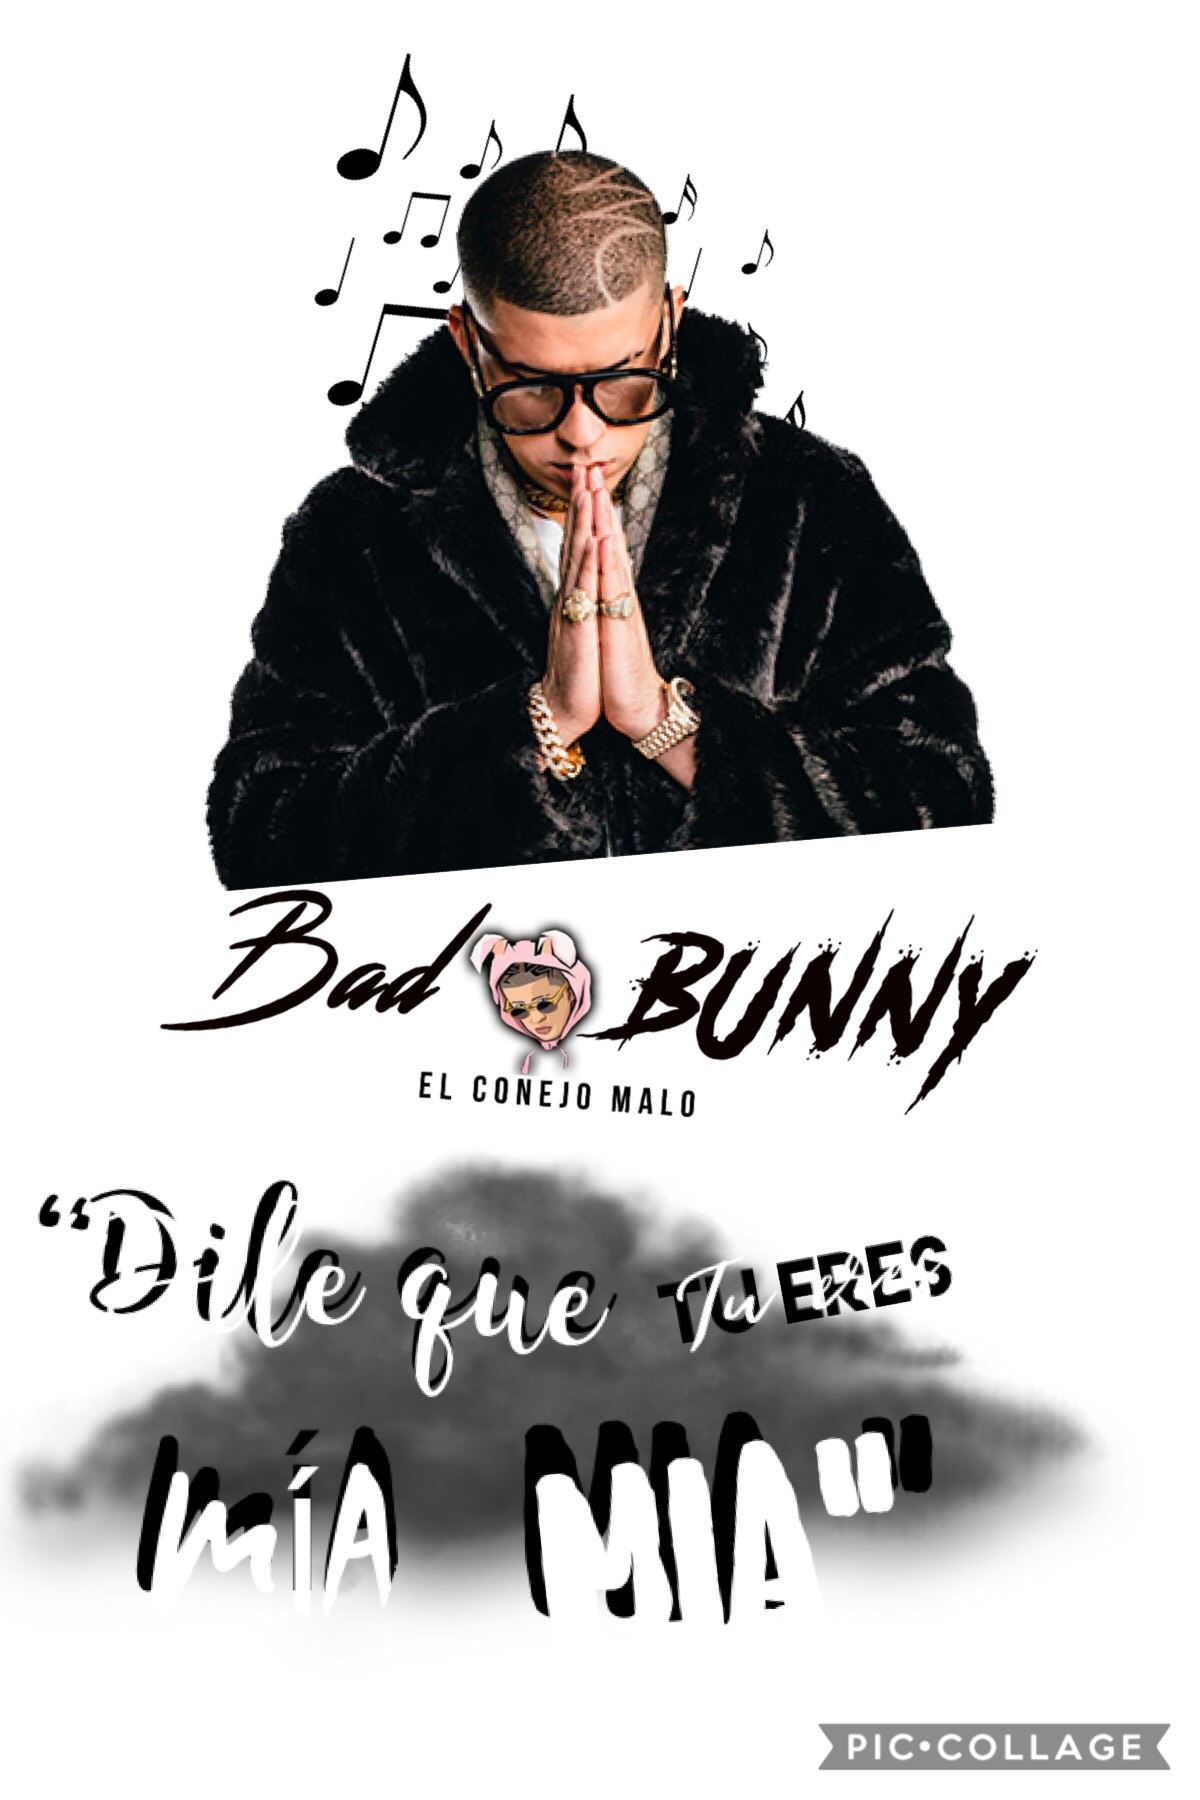 🤗TAP🤗
OMGG hey guysss !! It’s been awhile since I’ve posted but here’s something I made bc I love bad bunny I hope you like it 💕🐰